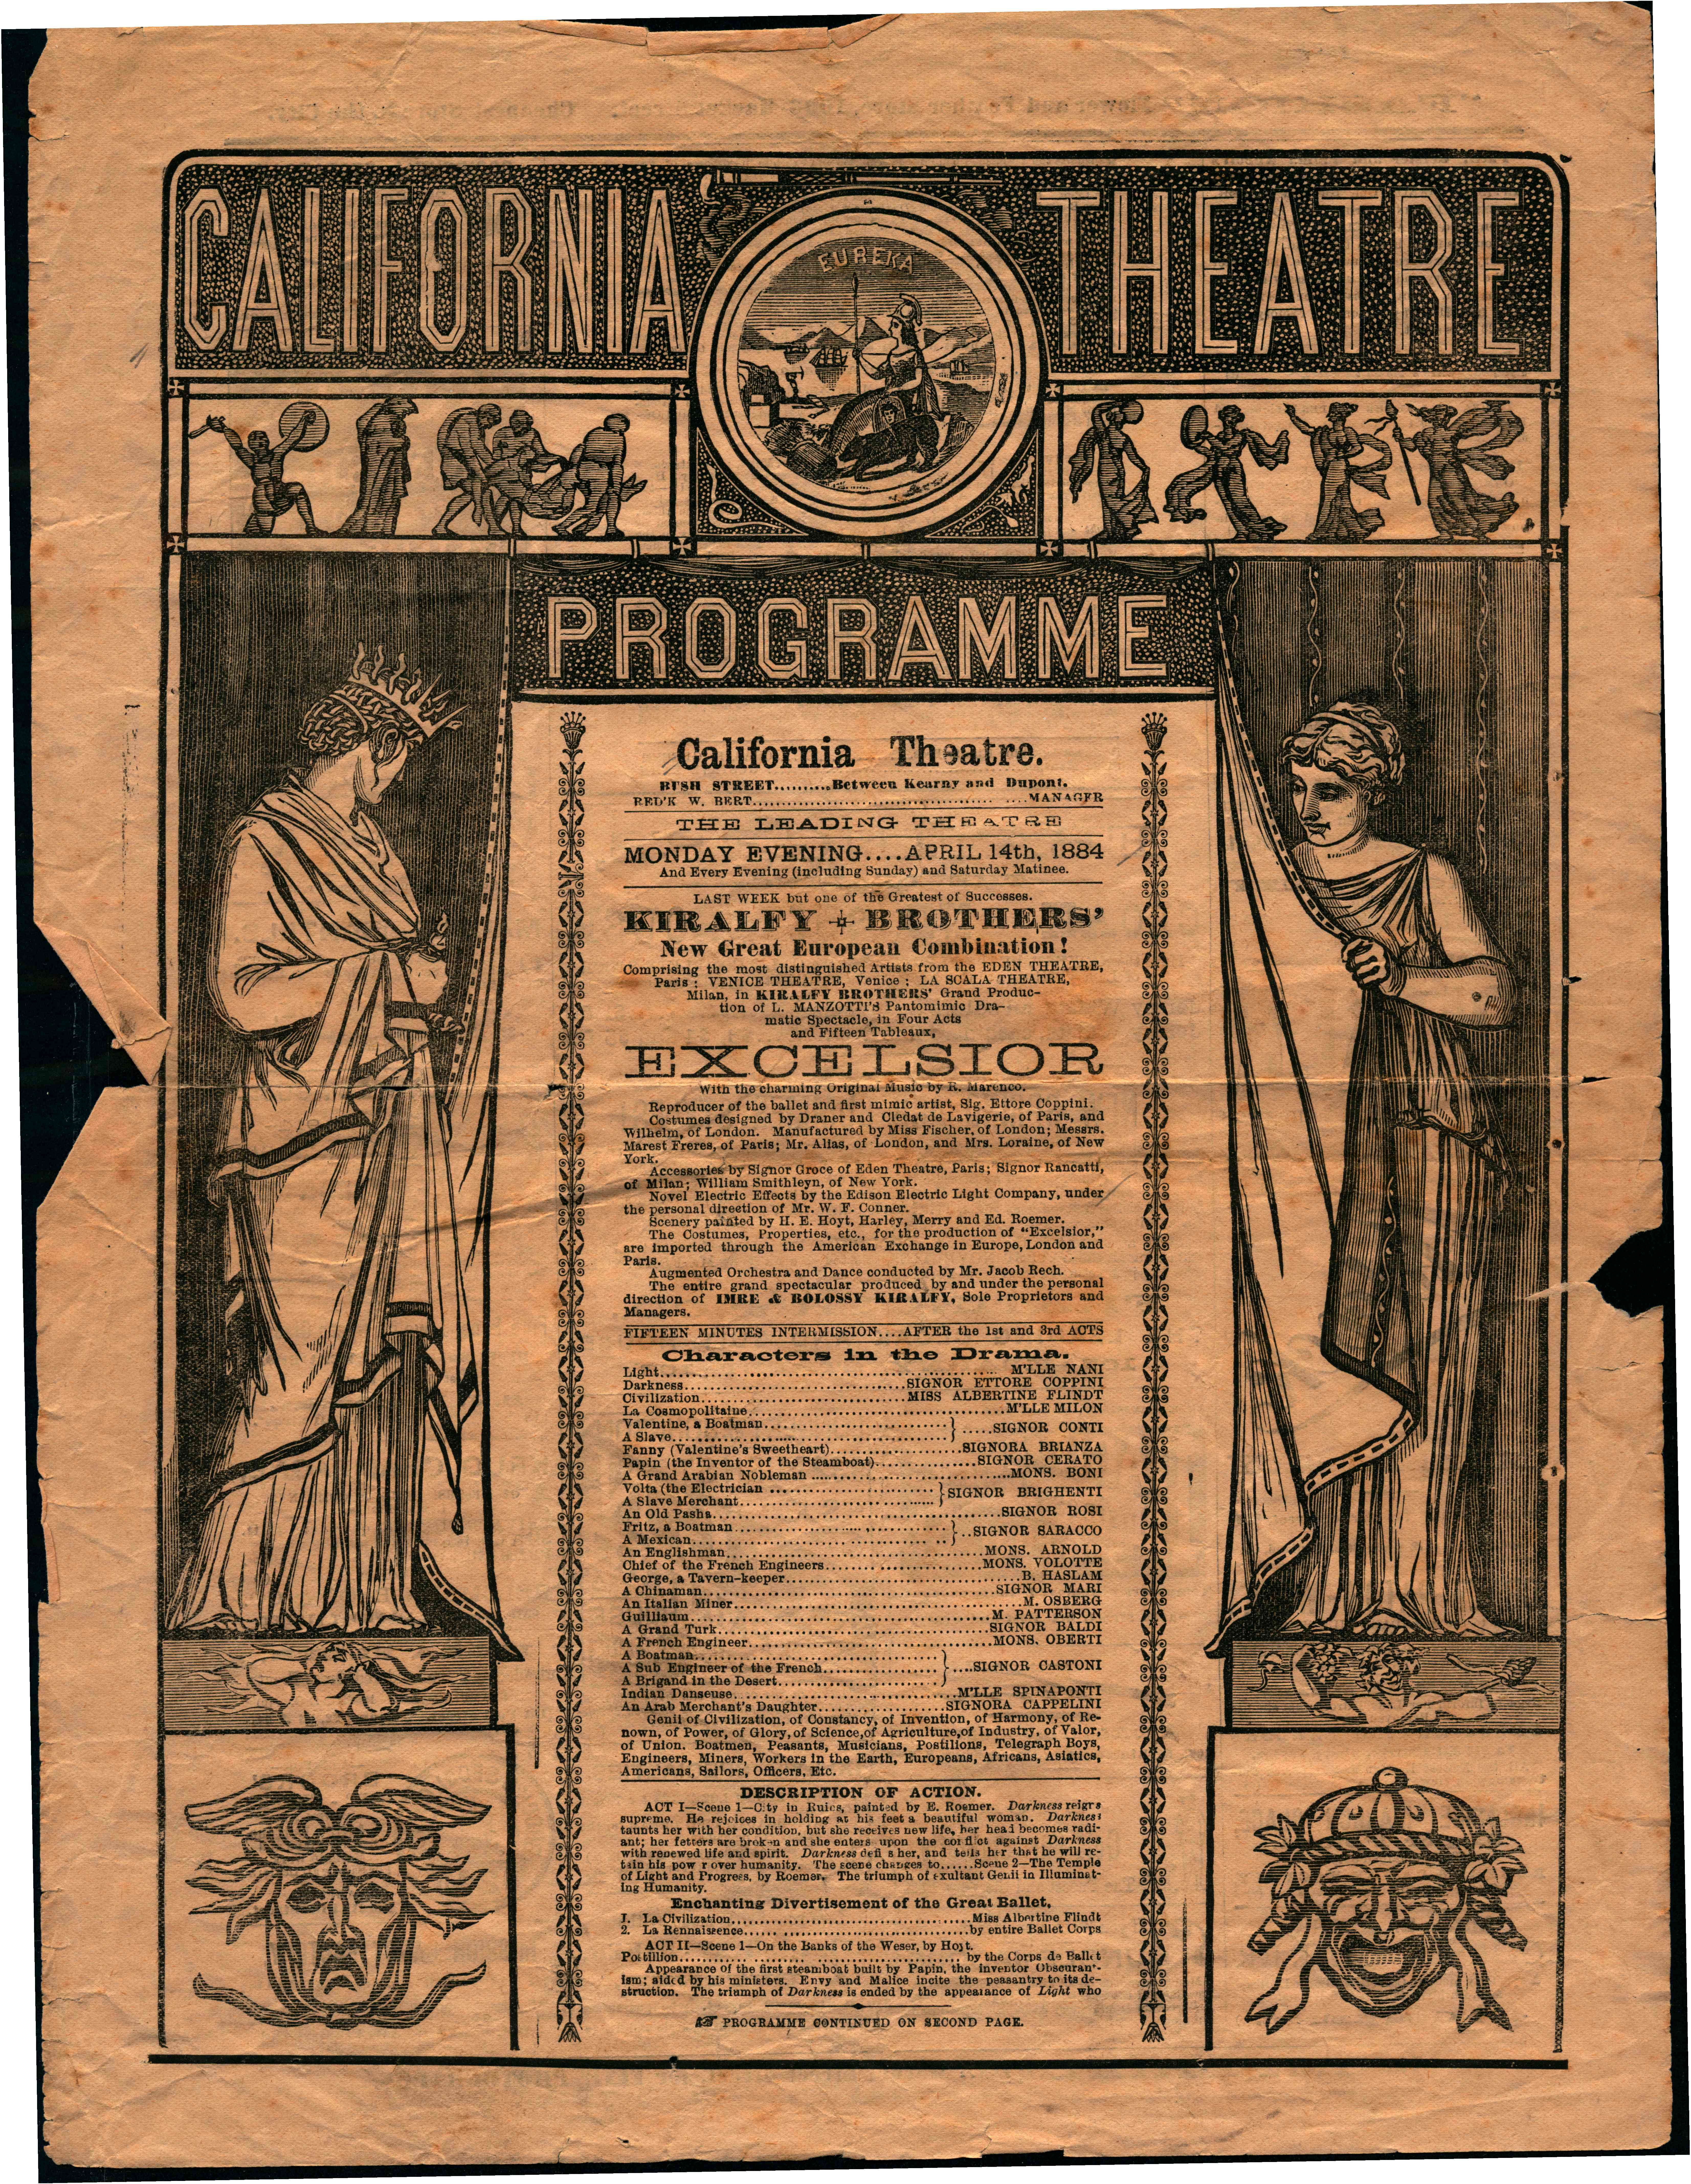 Front cover shows two muses pulling back a theatrical curtain to reveal the theatre information plus information about the upcoming performance